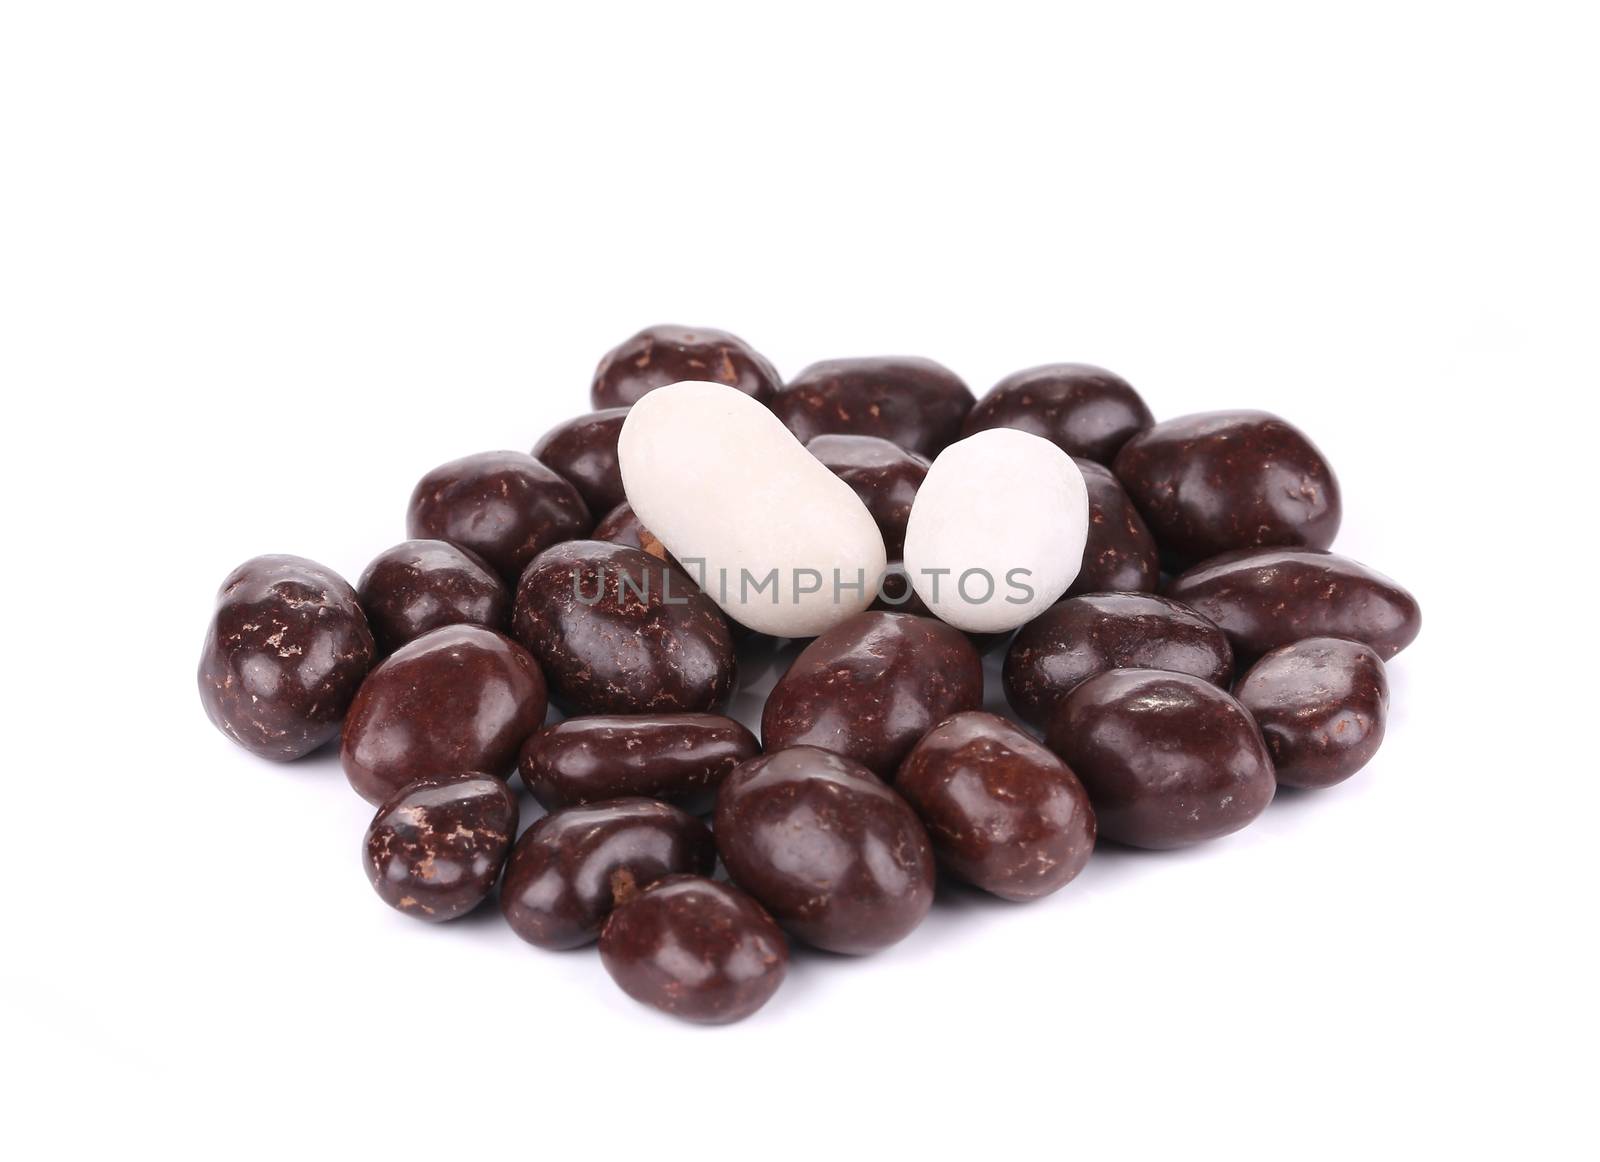 Dark brown dragee in chocolate cover. Isolated on a white background.